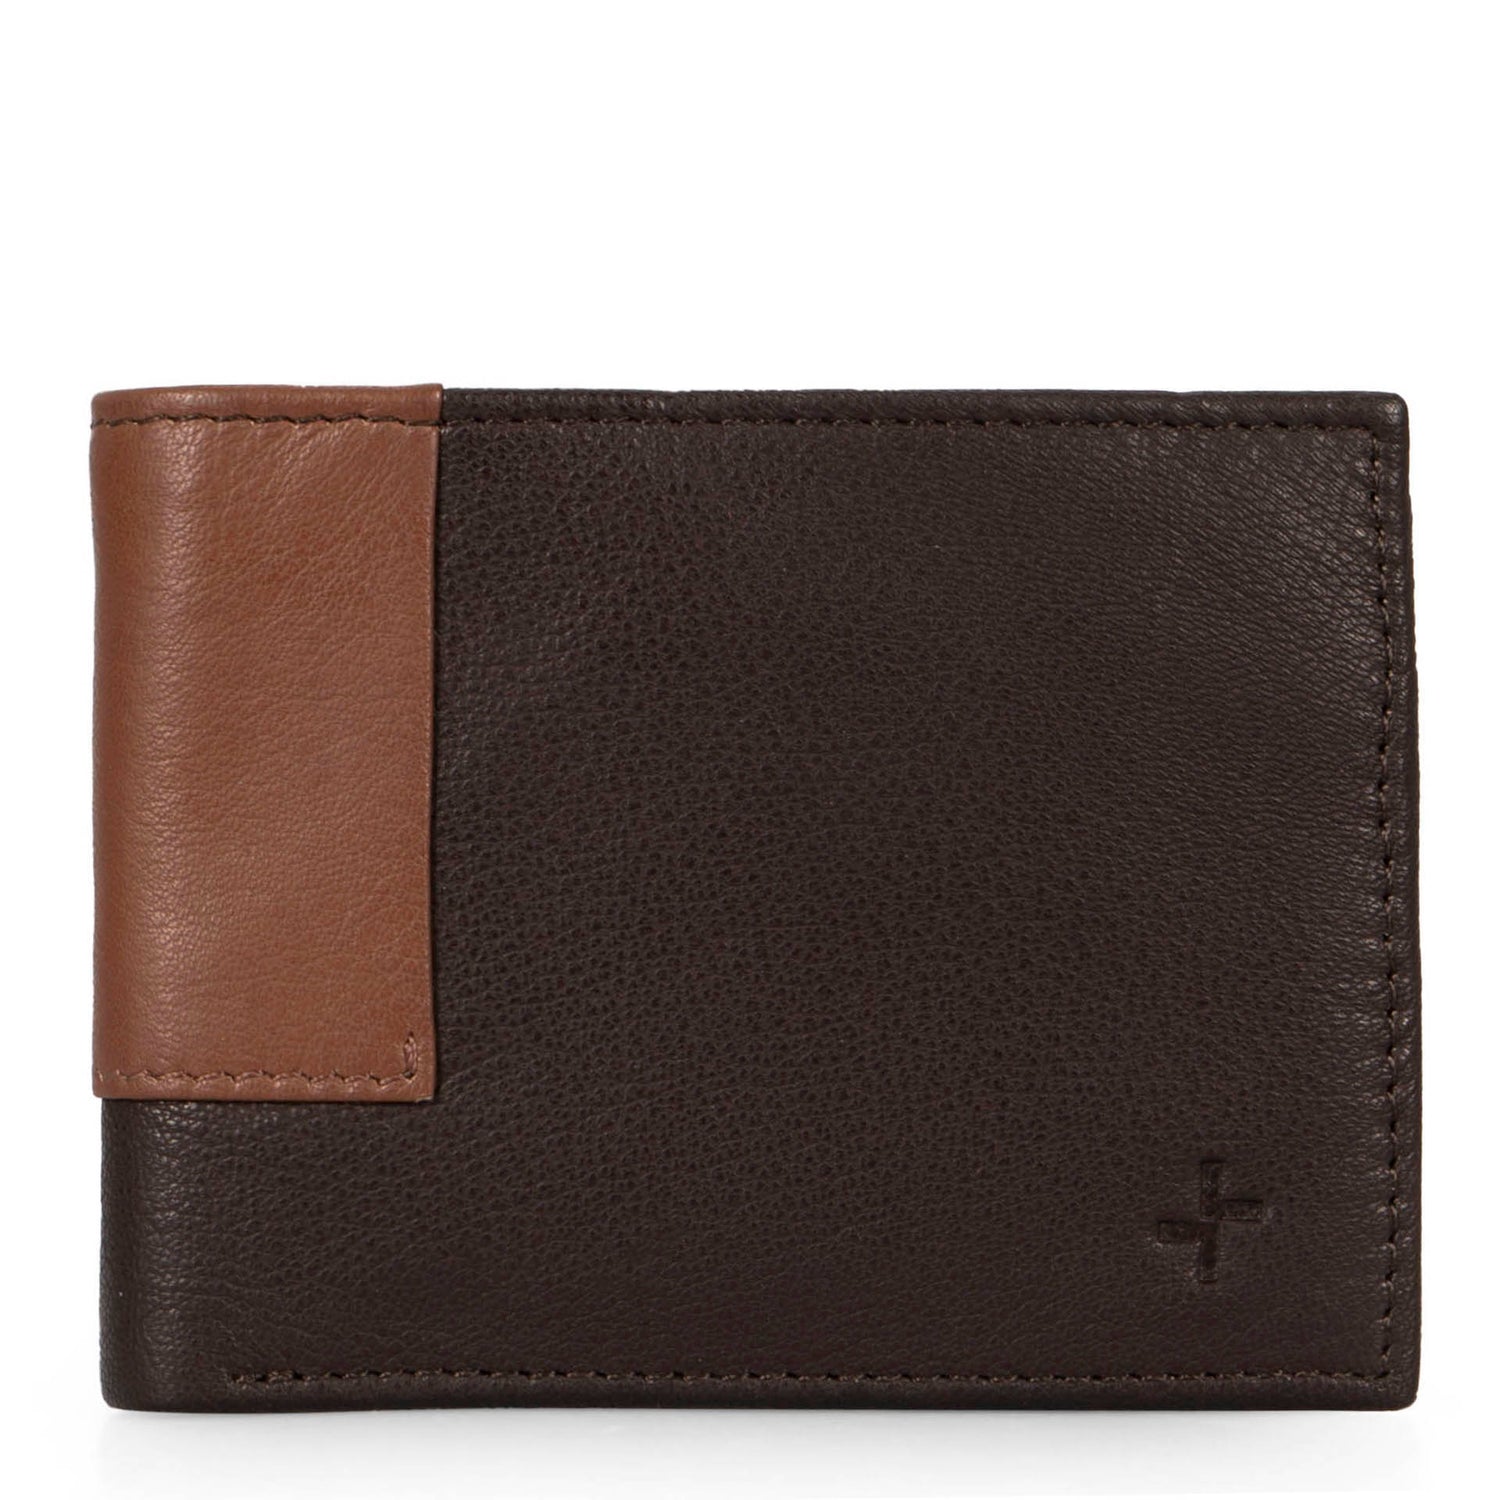 Front side of a dark-light brown wallet called Calwood designed by Tracker, showcasing the tracker logo at the bottom right corner and soft leather texture.